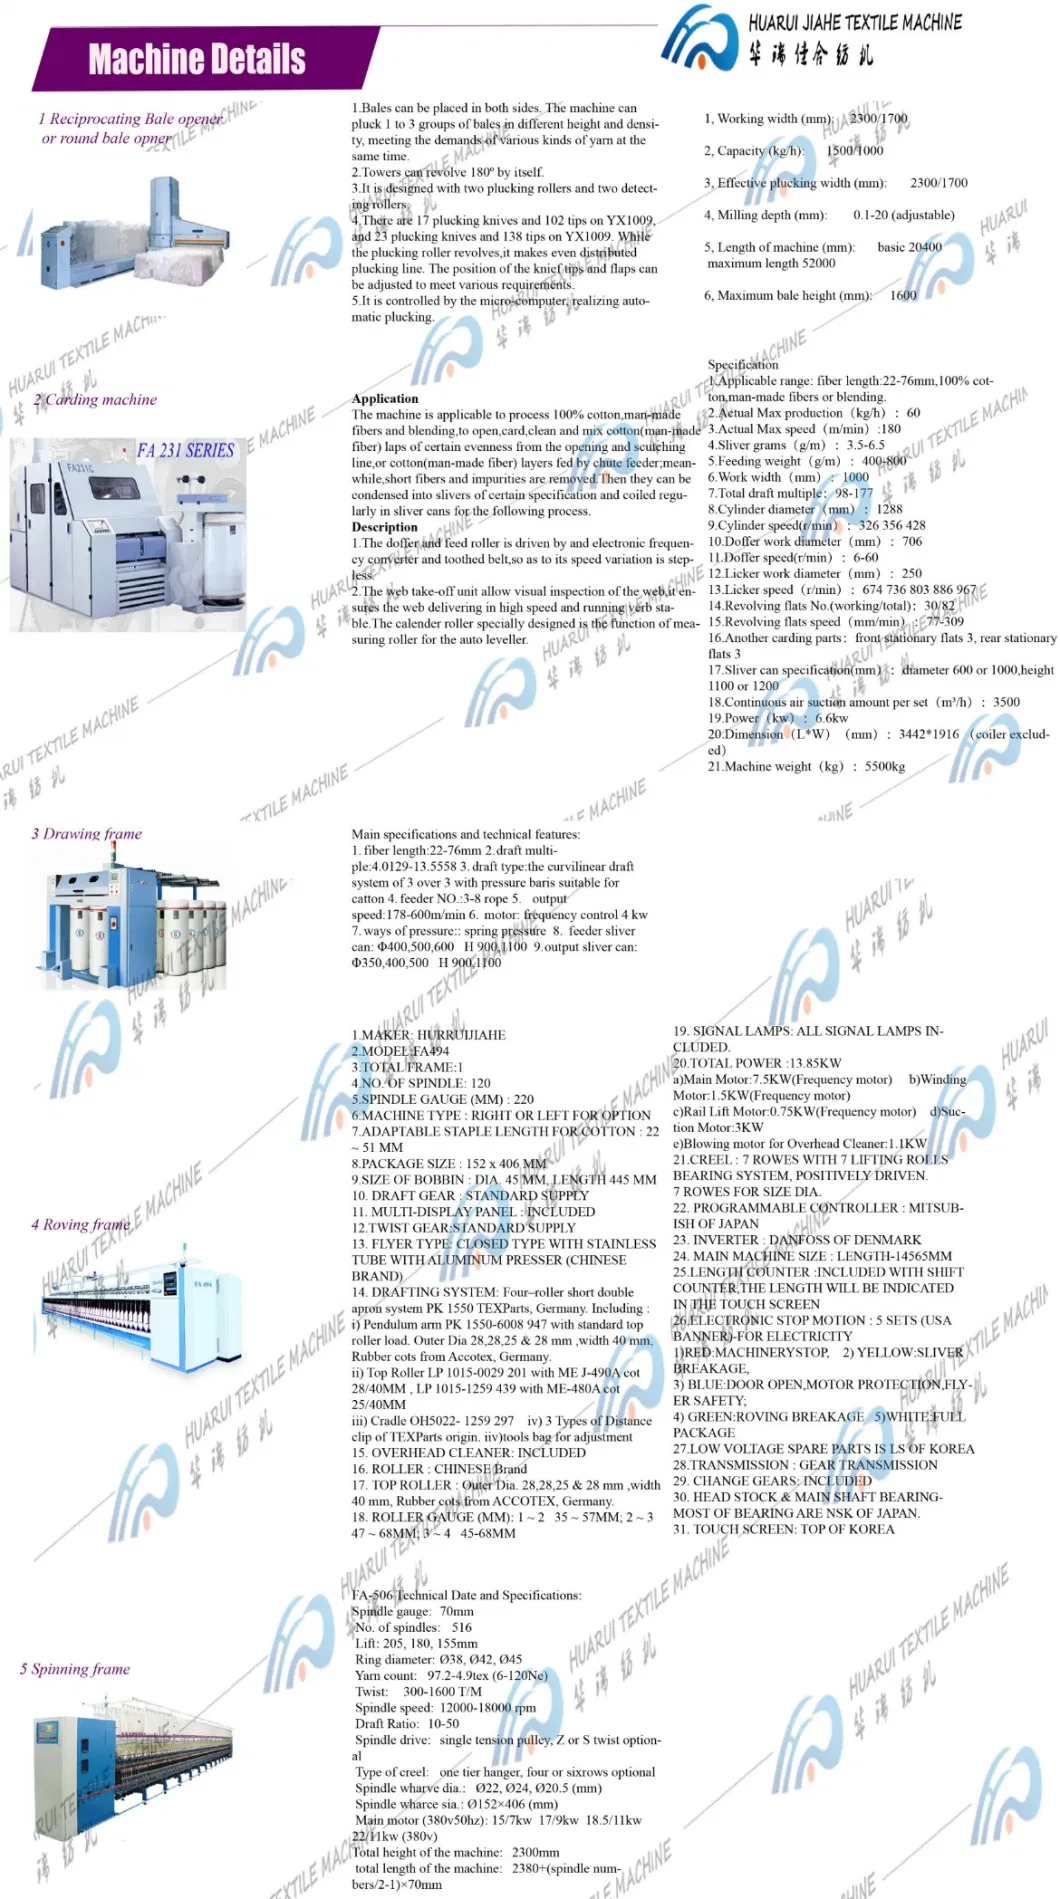 Service First Laboratory Infrared Sample Proofing and Dyeing Machine Printing, Dyeing and Finishing Textile Machinery and Equipment